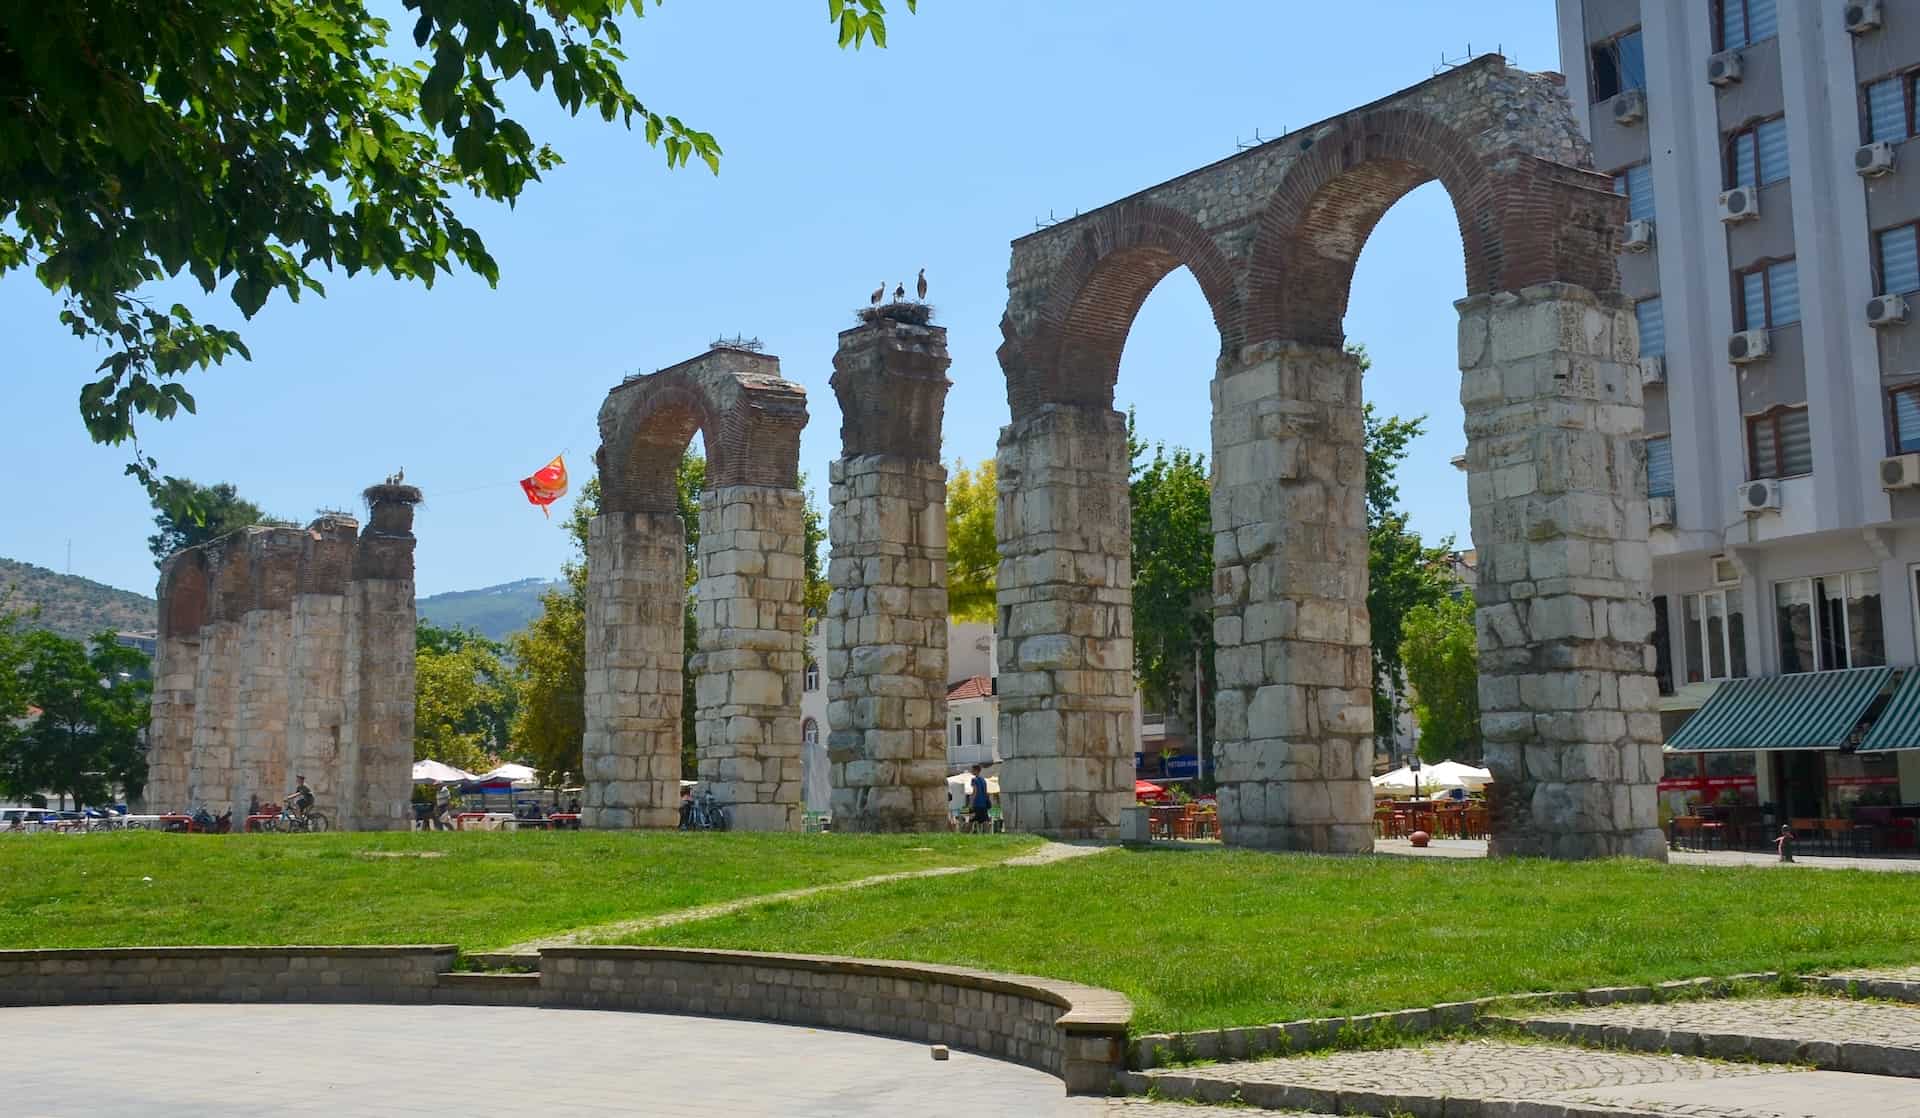 Tallest section of the Byzantine aqueduct in Selçuk, Turkey